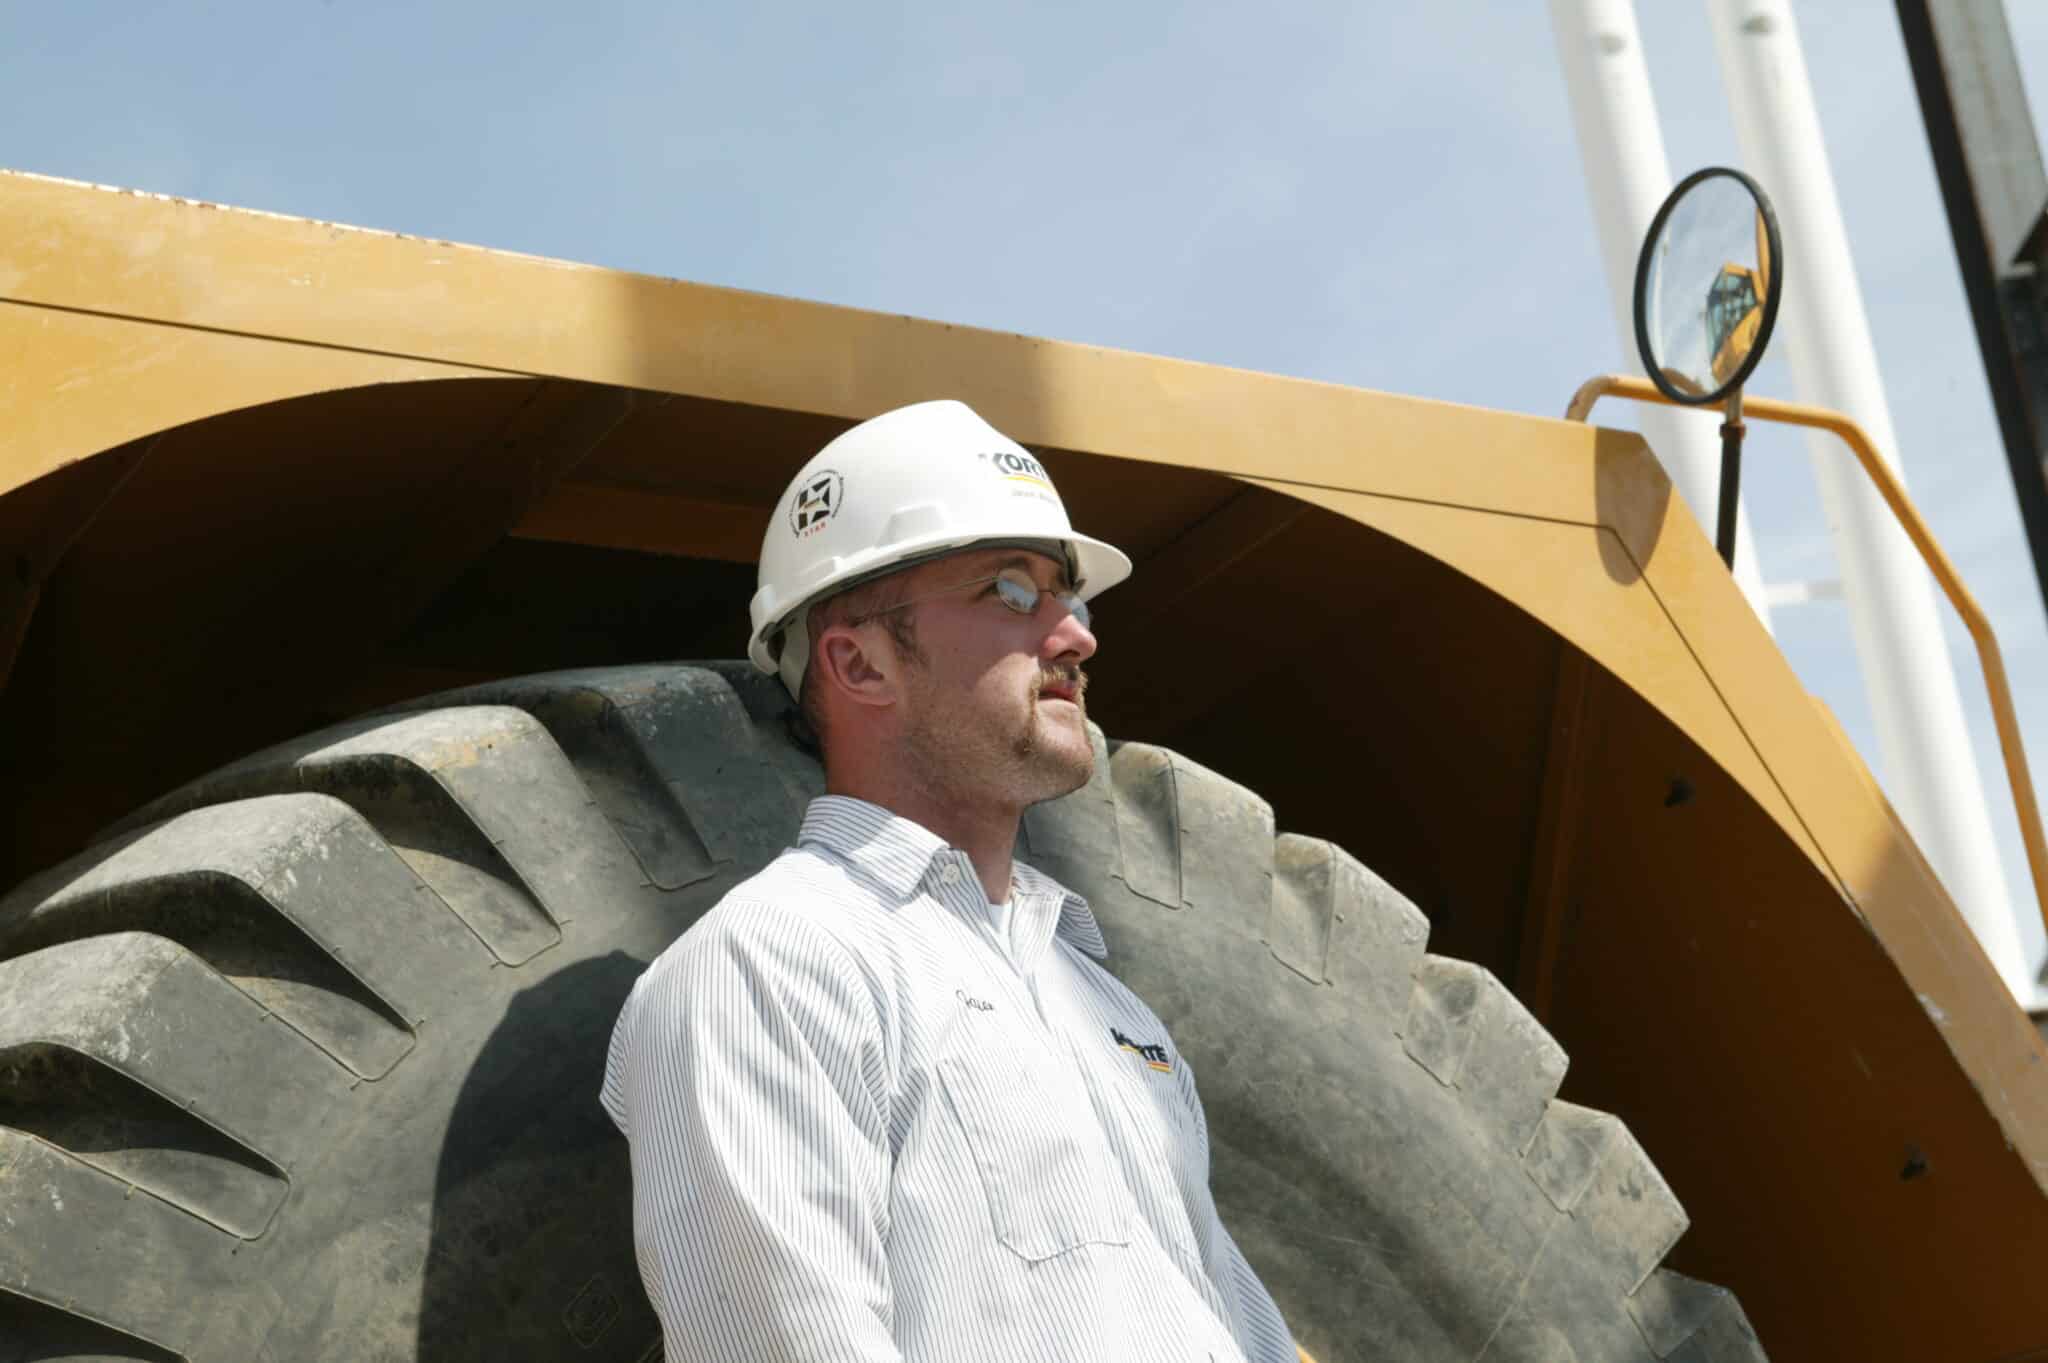 Man in a hardhat leaning against a heavy duty tire